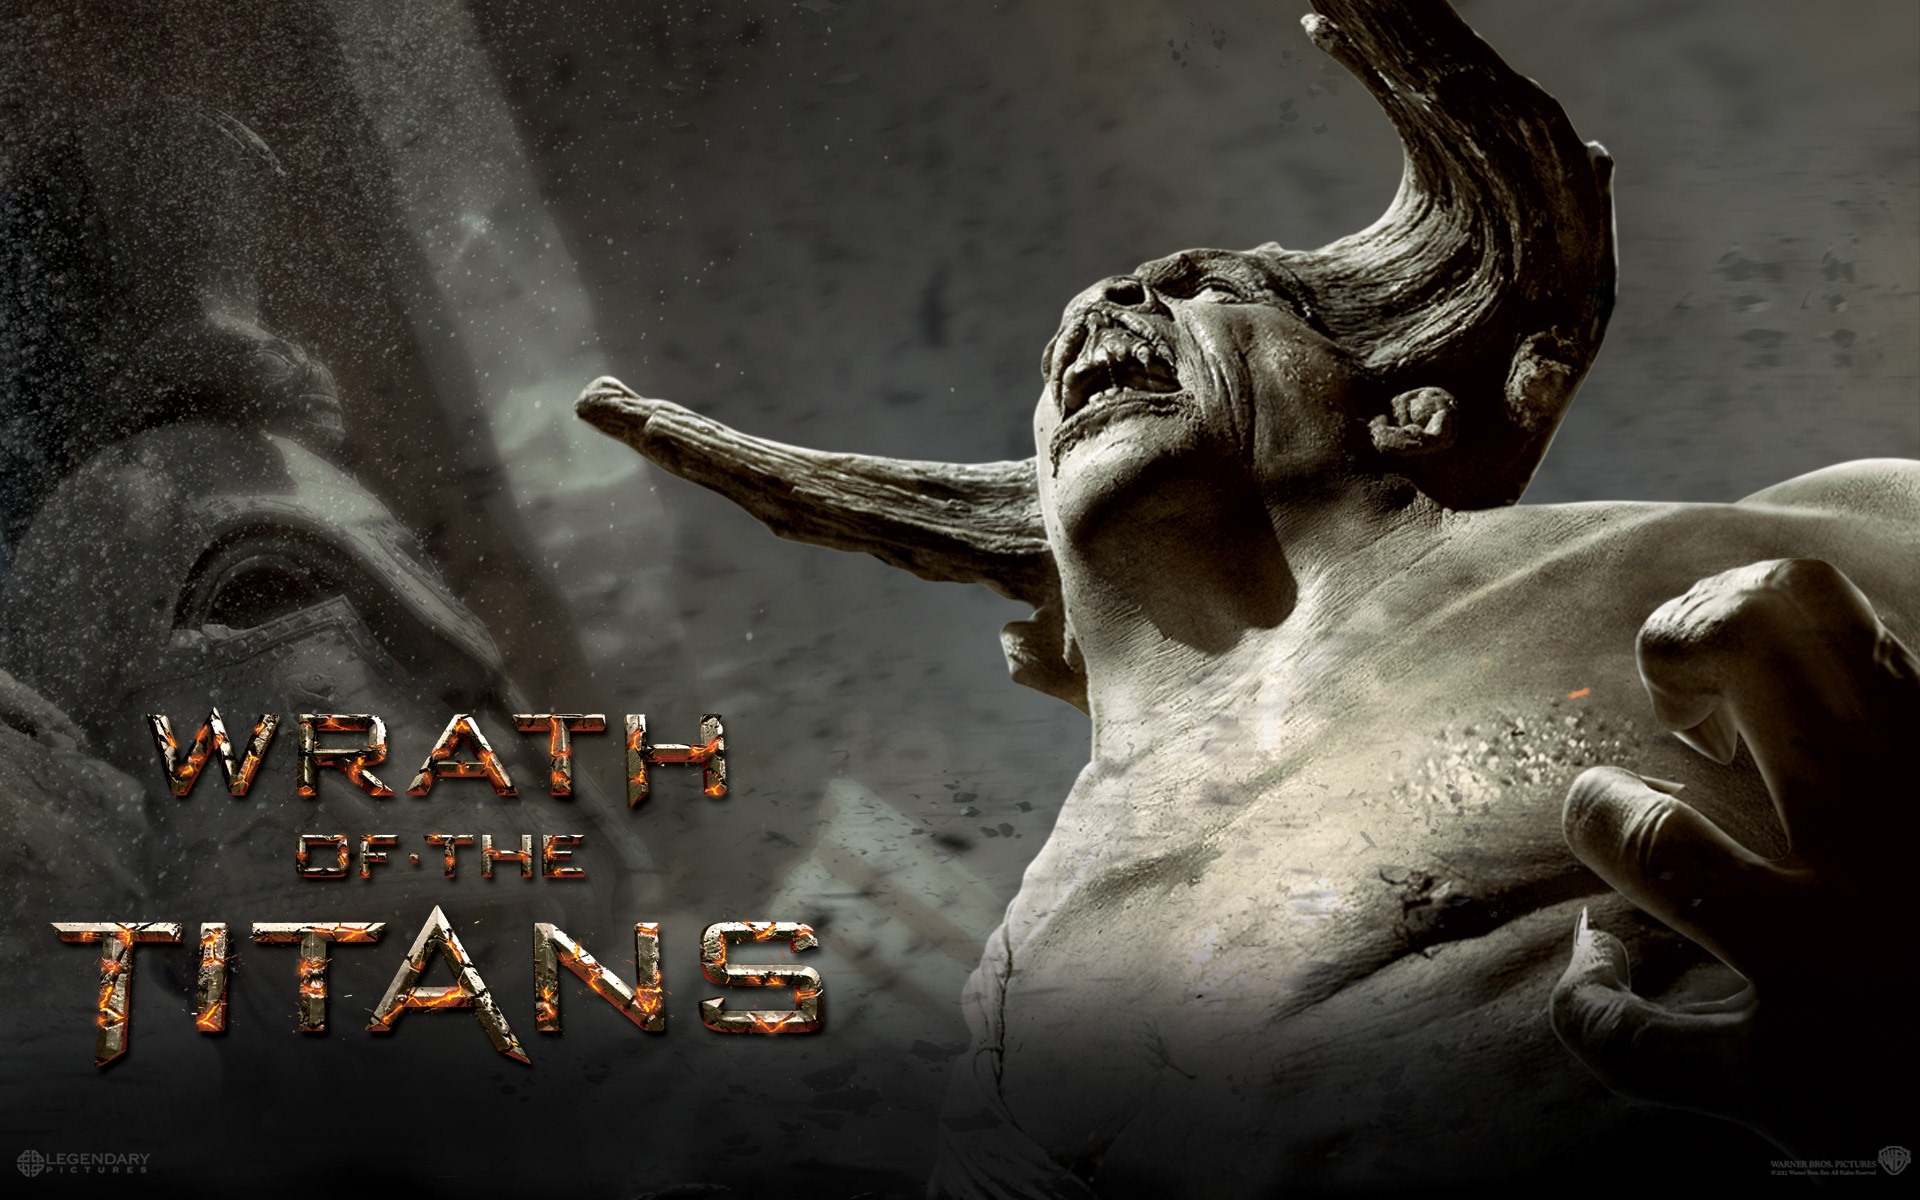 Wrath of the Titans HD Wallpapers #7 - 1920x1200